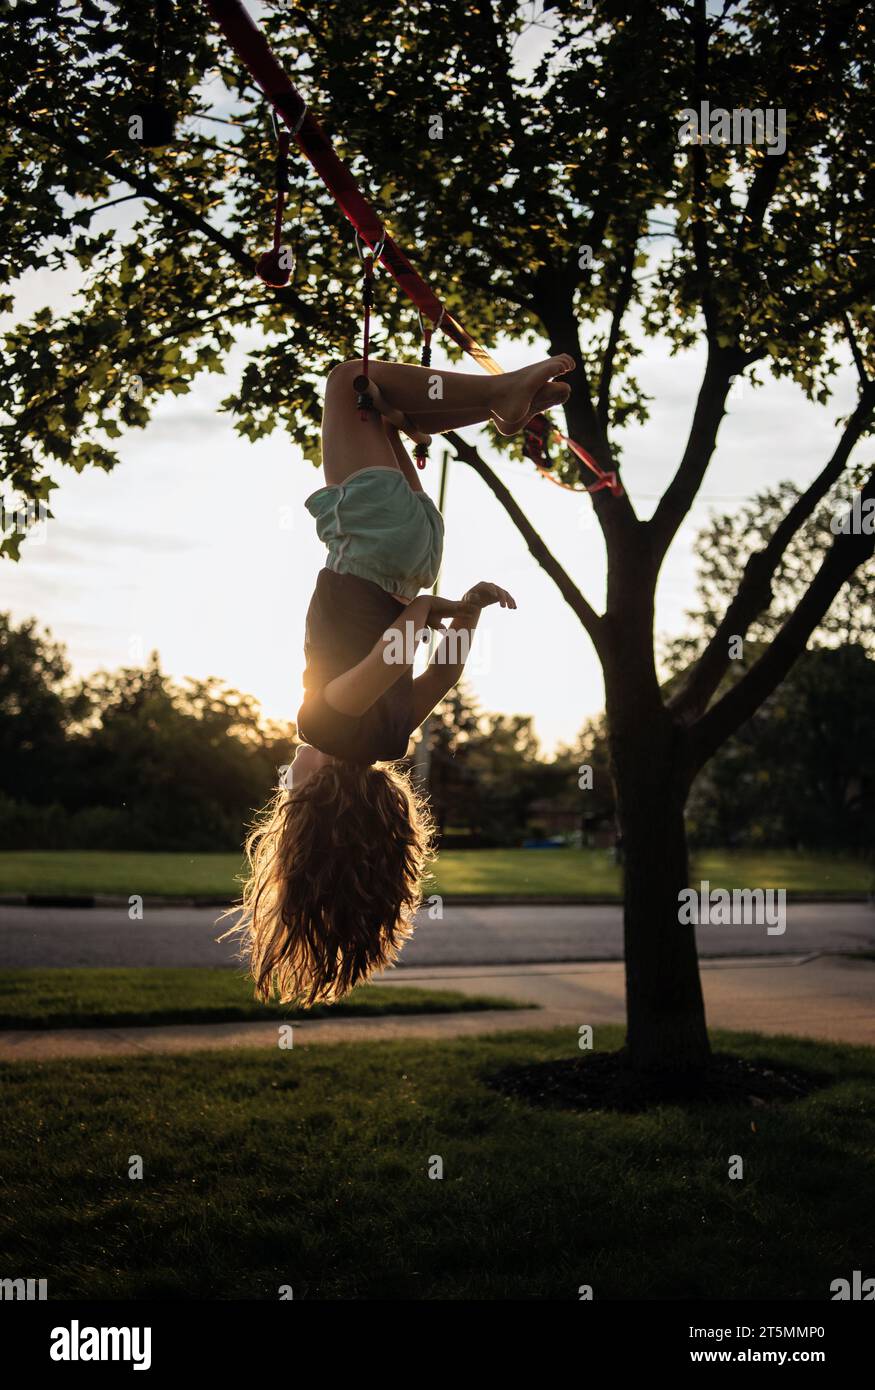 Young girl hanging upside down from tree in summer Stock Photo